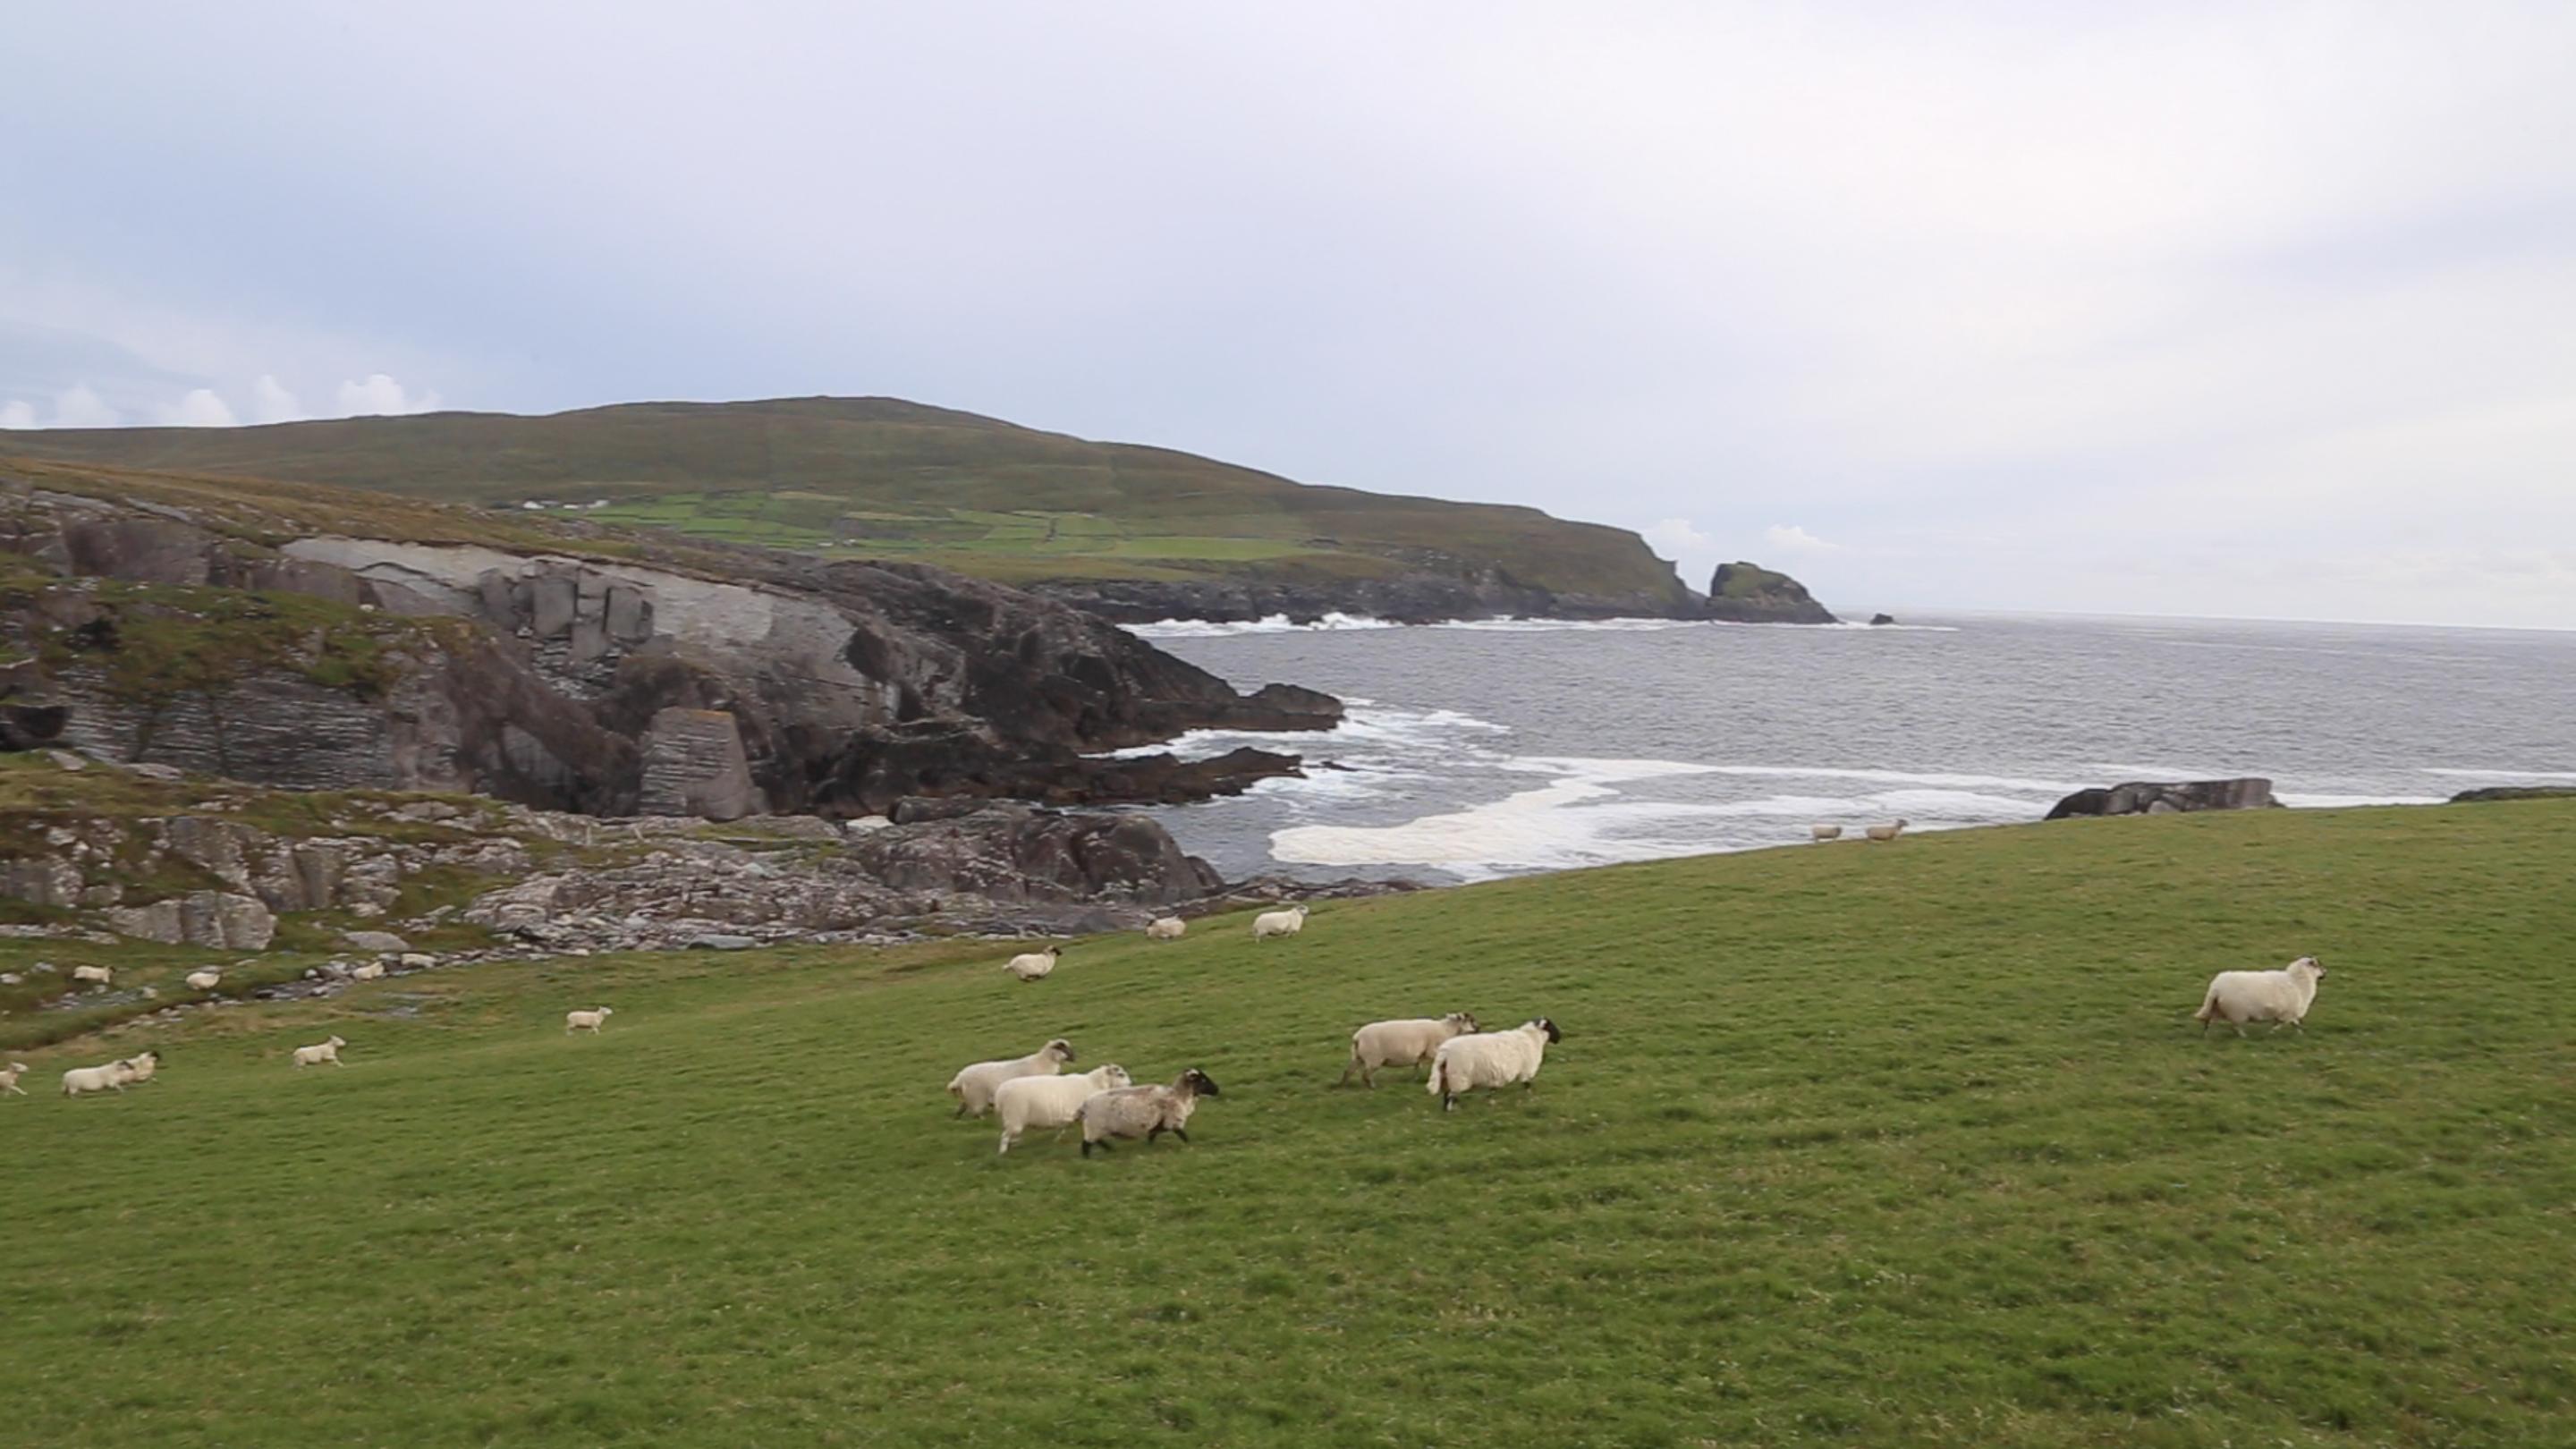 And that was it. It might be worth returning with a drone or some free running friends. Dunlough Castle, it's called. Here's a token shot of some sheep on the coast.